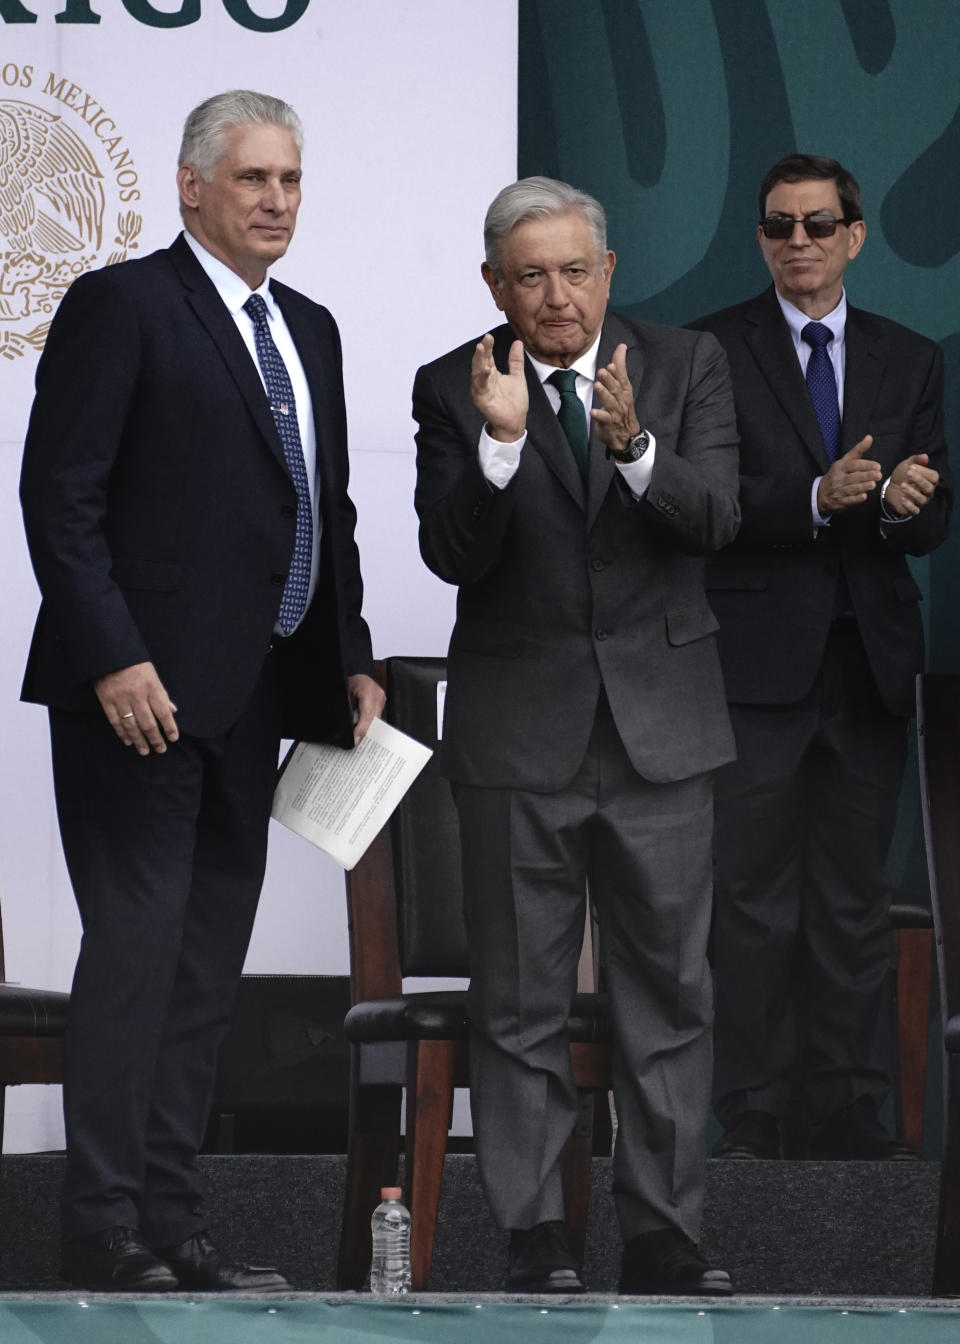 Cuba's President Miguel Diaz-Canel, left, accompanies Mexico's President Andres Manuel Lopez Obrador, during Independence Day celebrations, in the Zocalo in Mexico City, Thursday, Sept. 16, 2021. (AP Photo/Marco Ugarte)